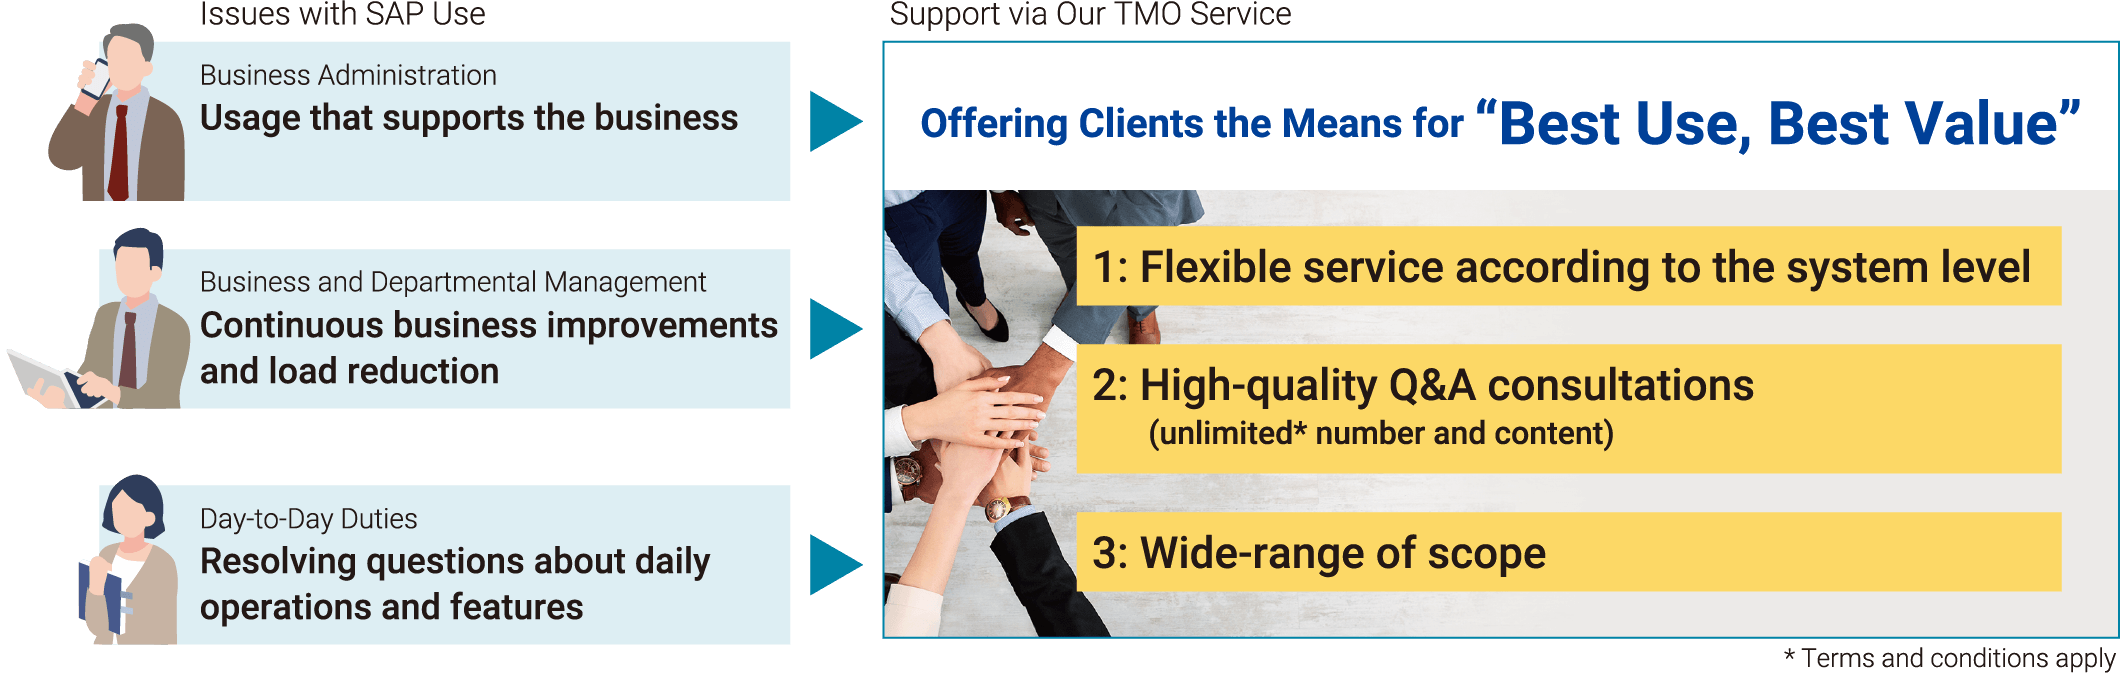 SAP System Operational Support “TMO Service”